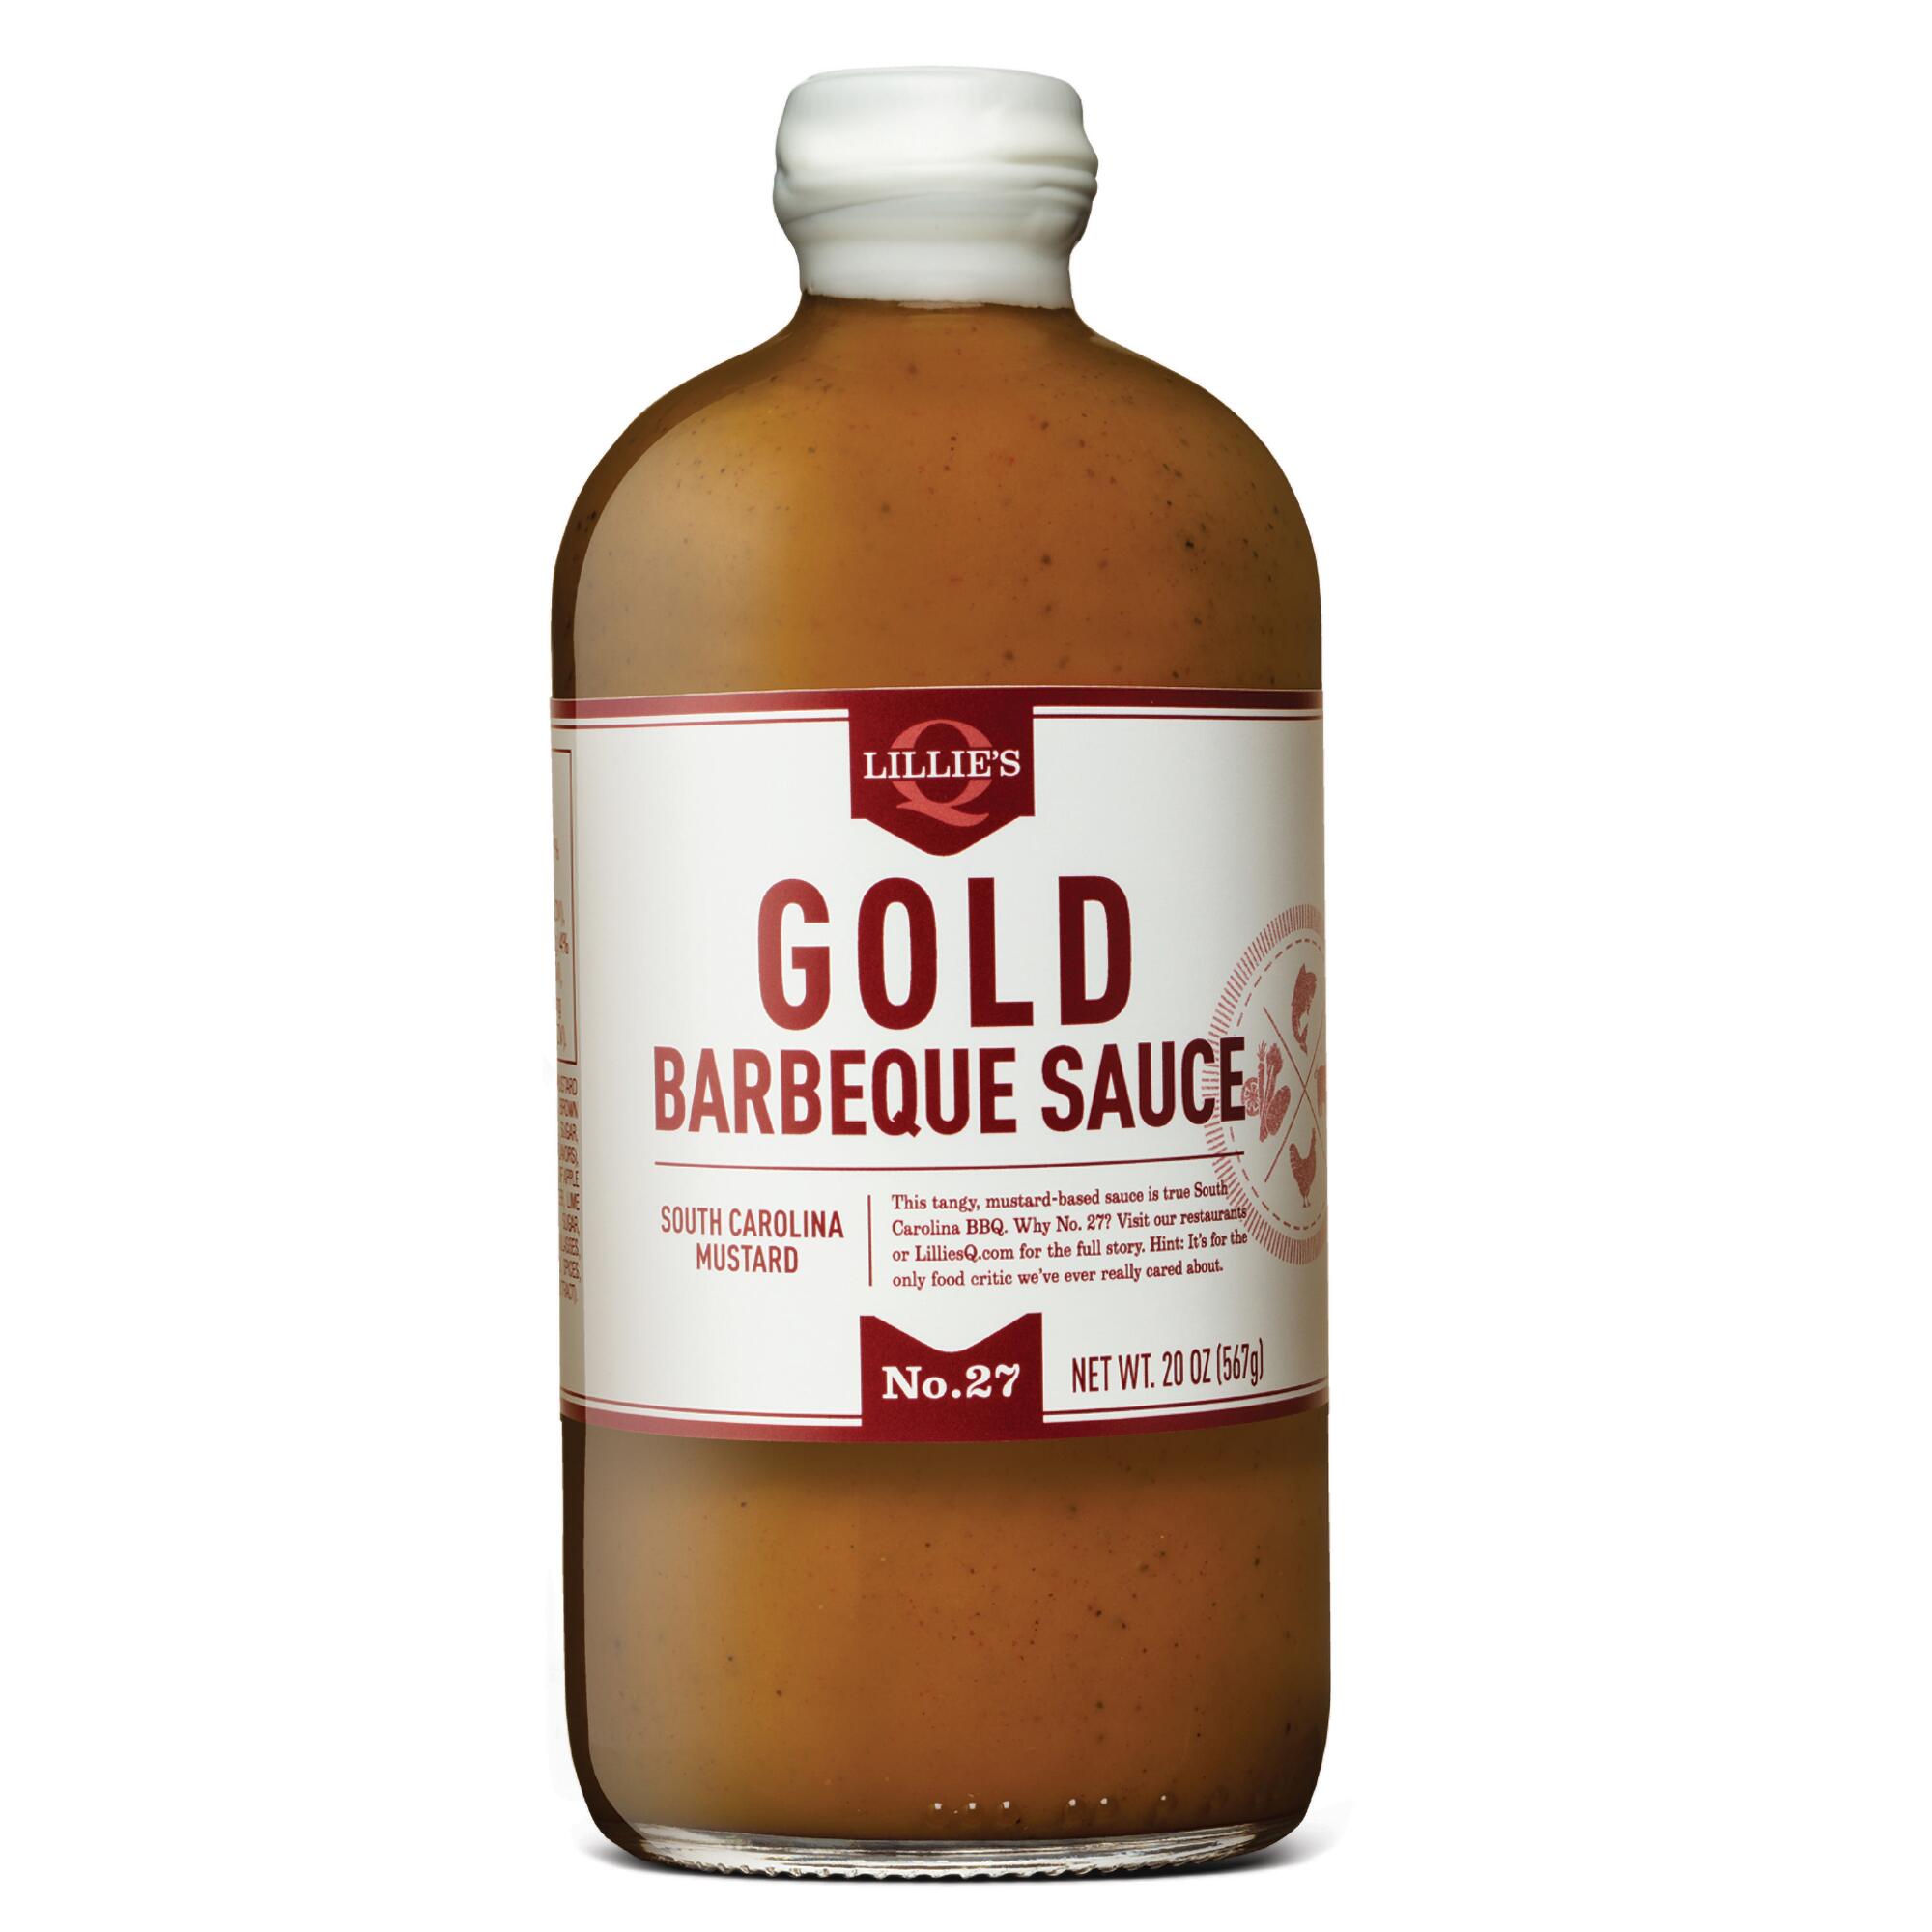 Lillie's Q Gold Barbeque Sauce by World Market